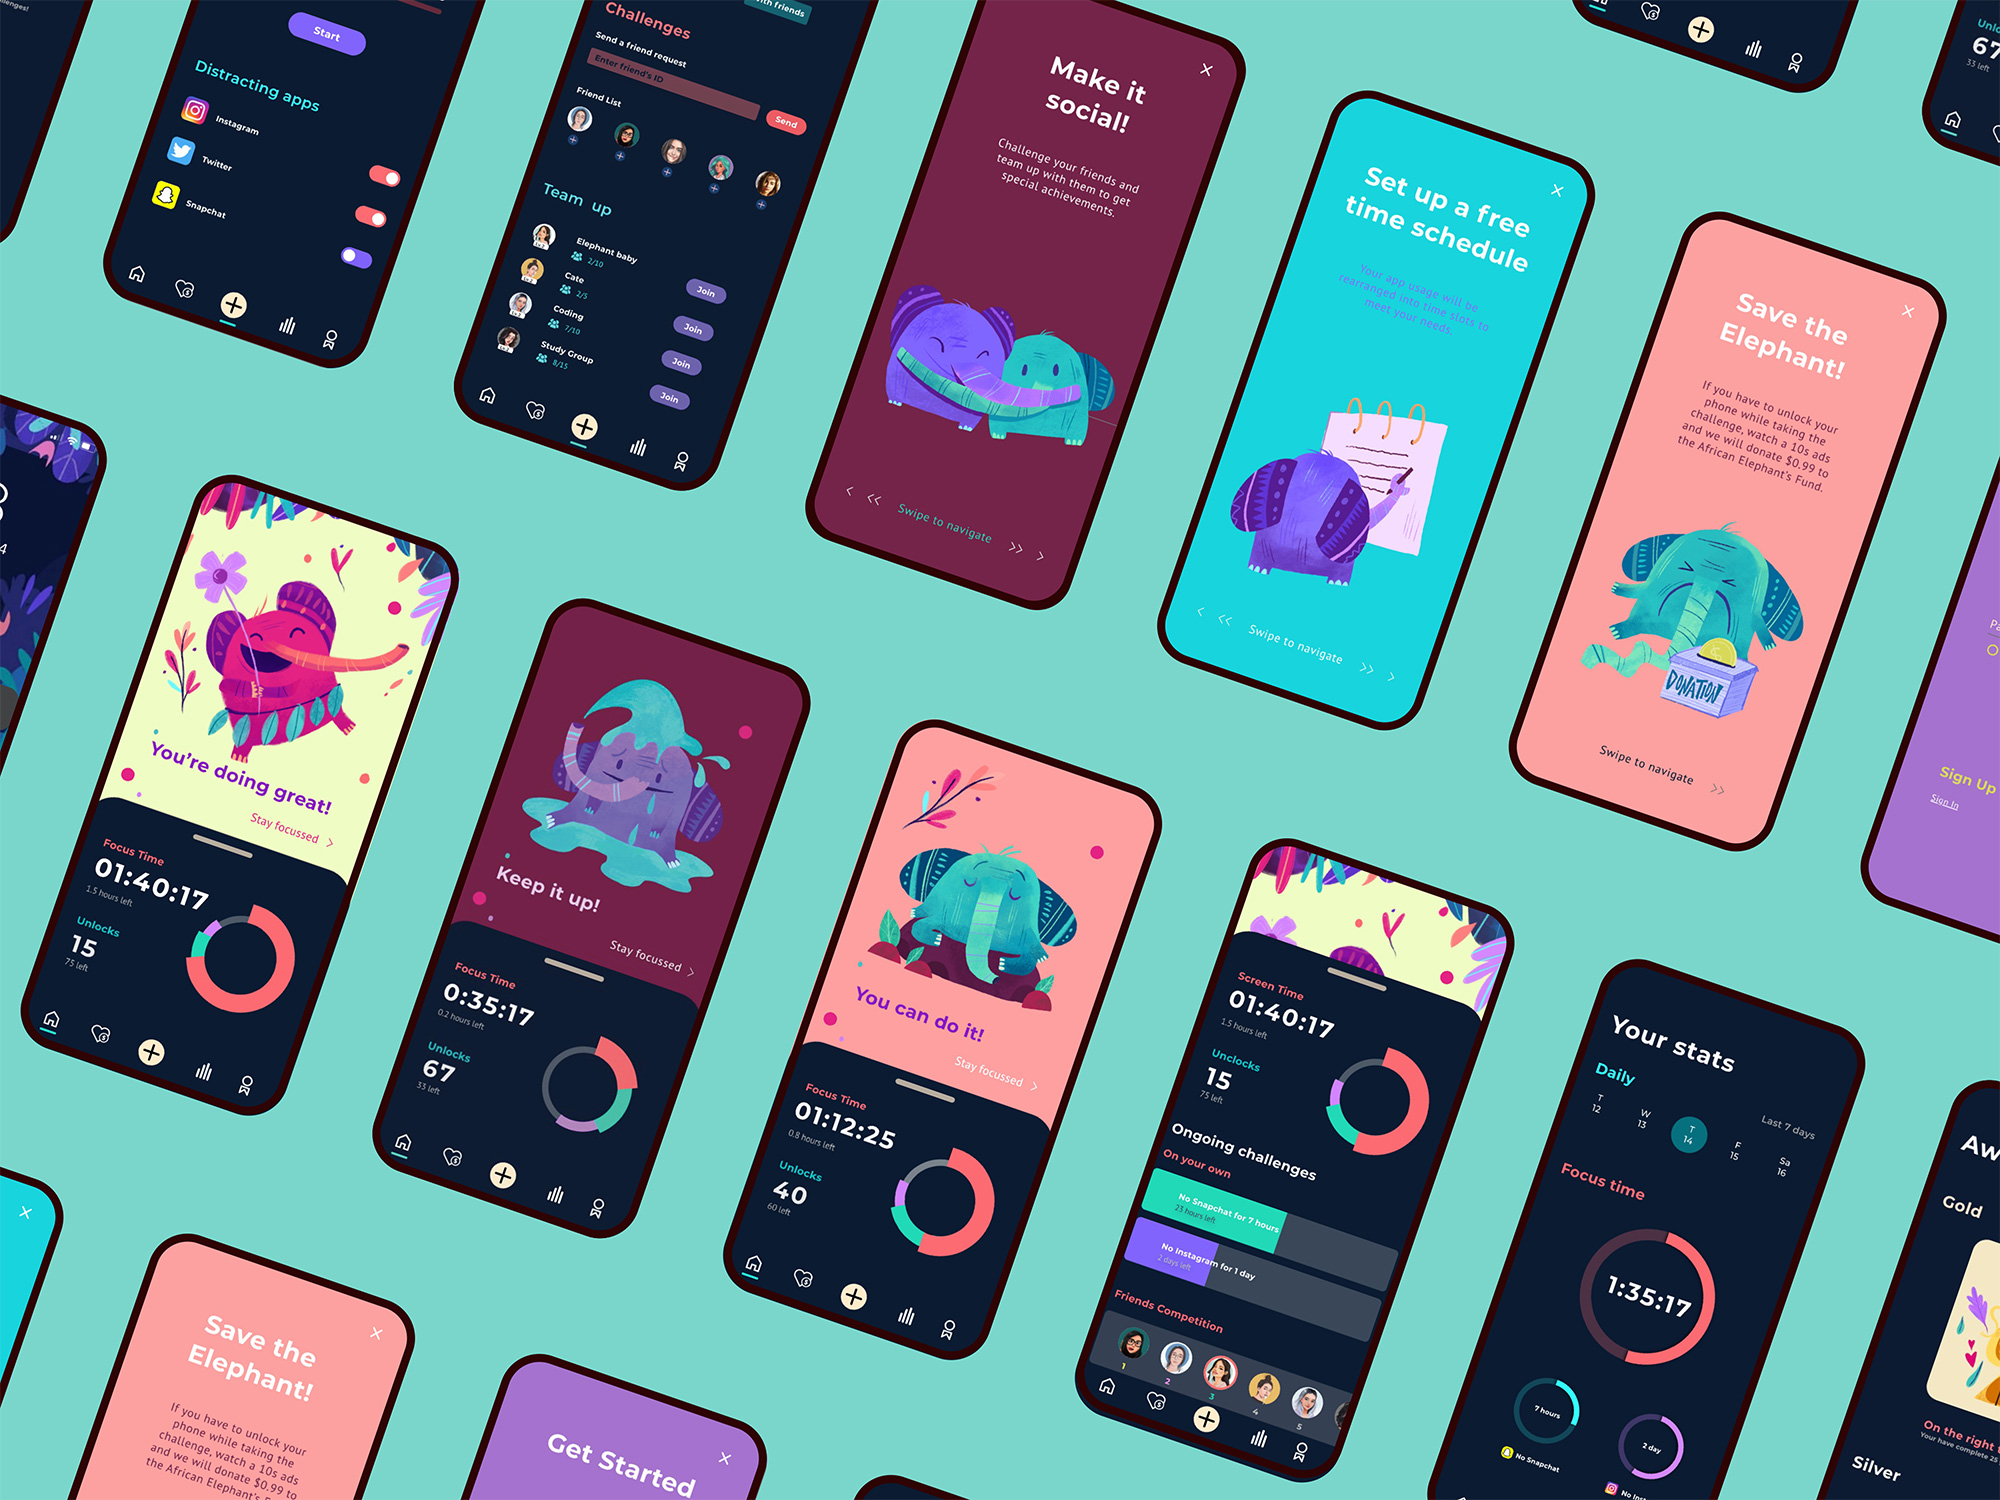 A set of mobile phone templates depicting colorful elephant drawings doing different activities. Each drawing has some stats, probably for a mobile app.